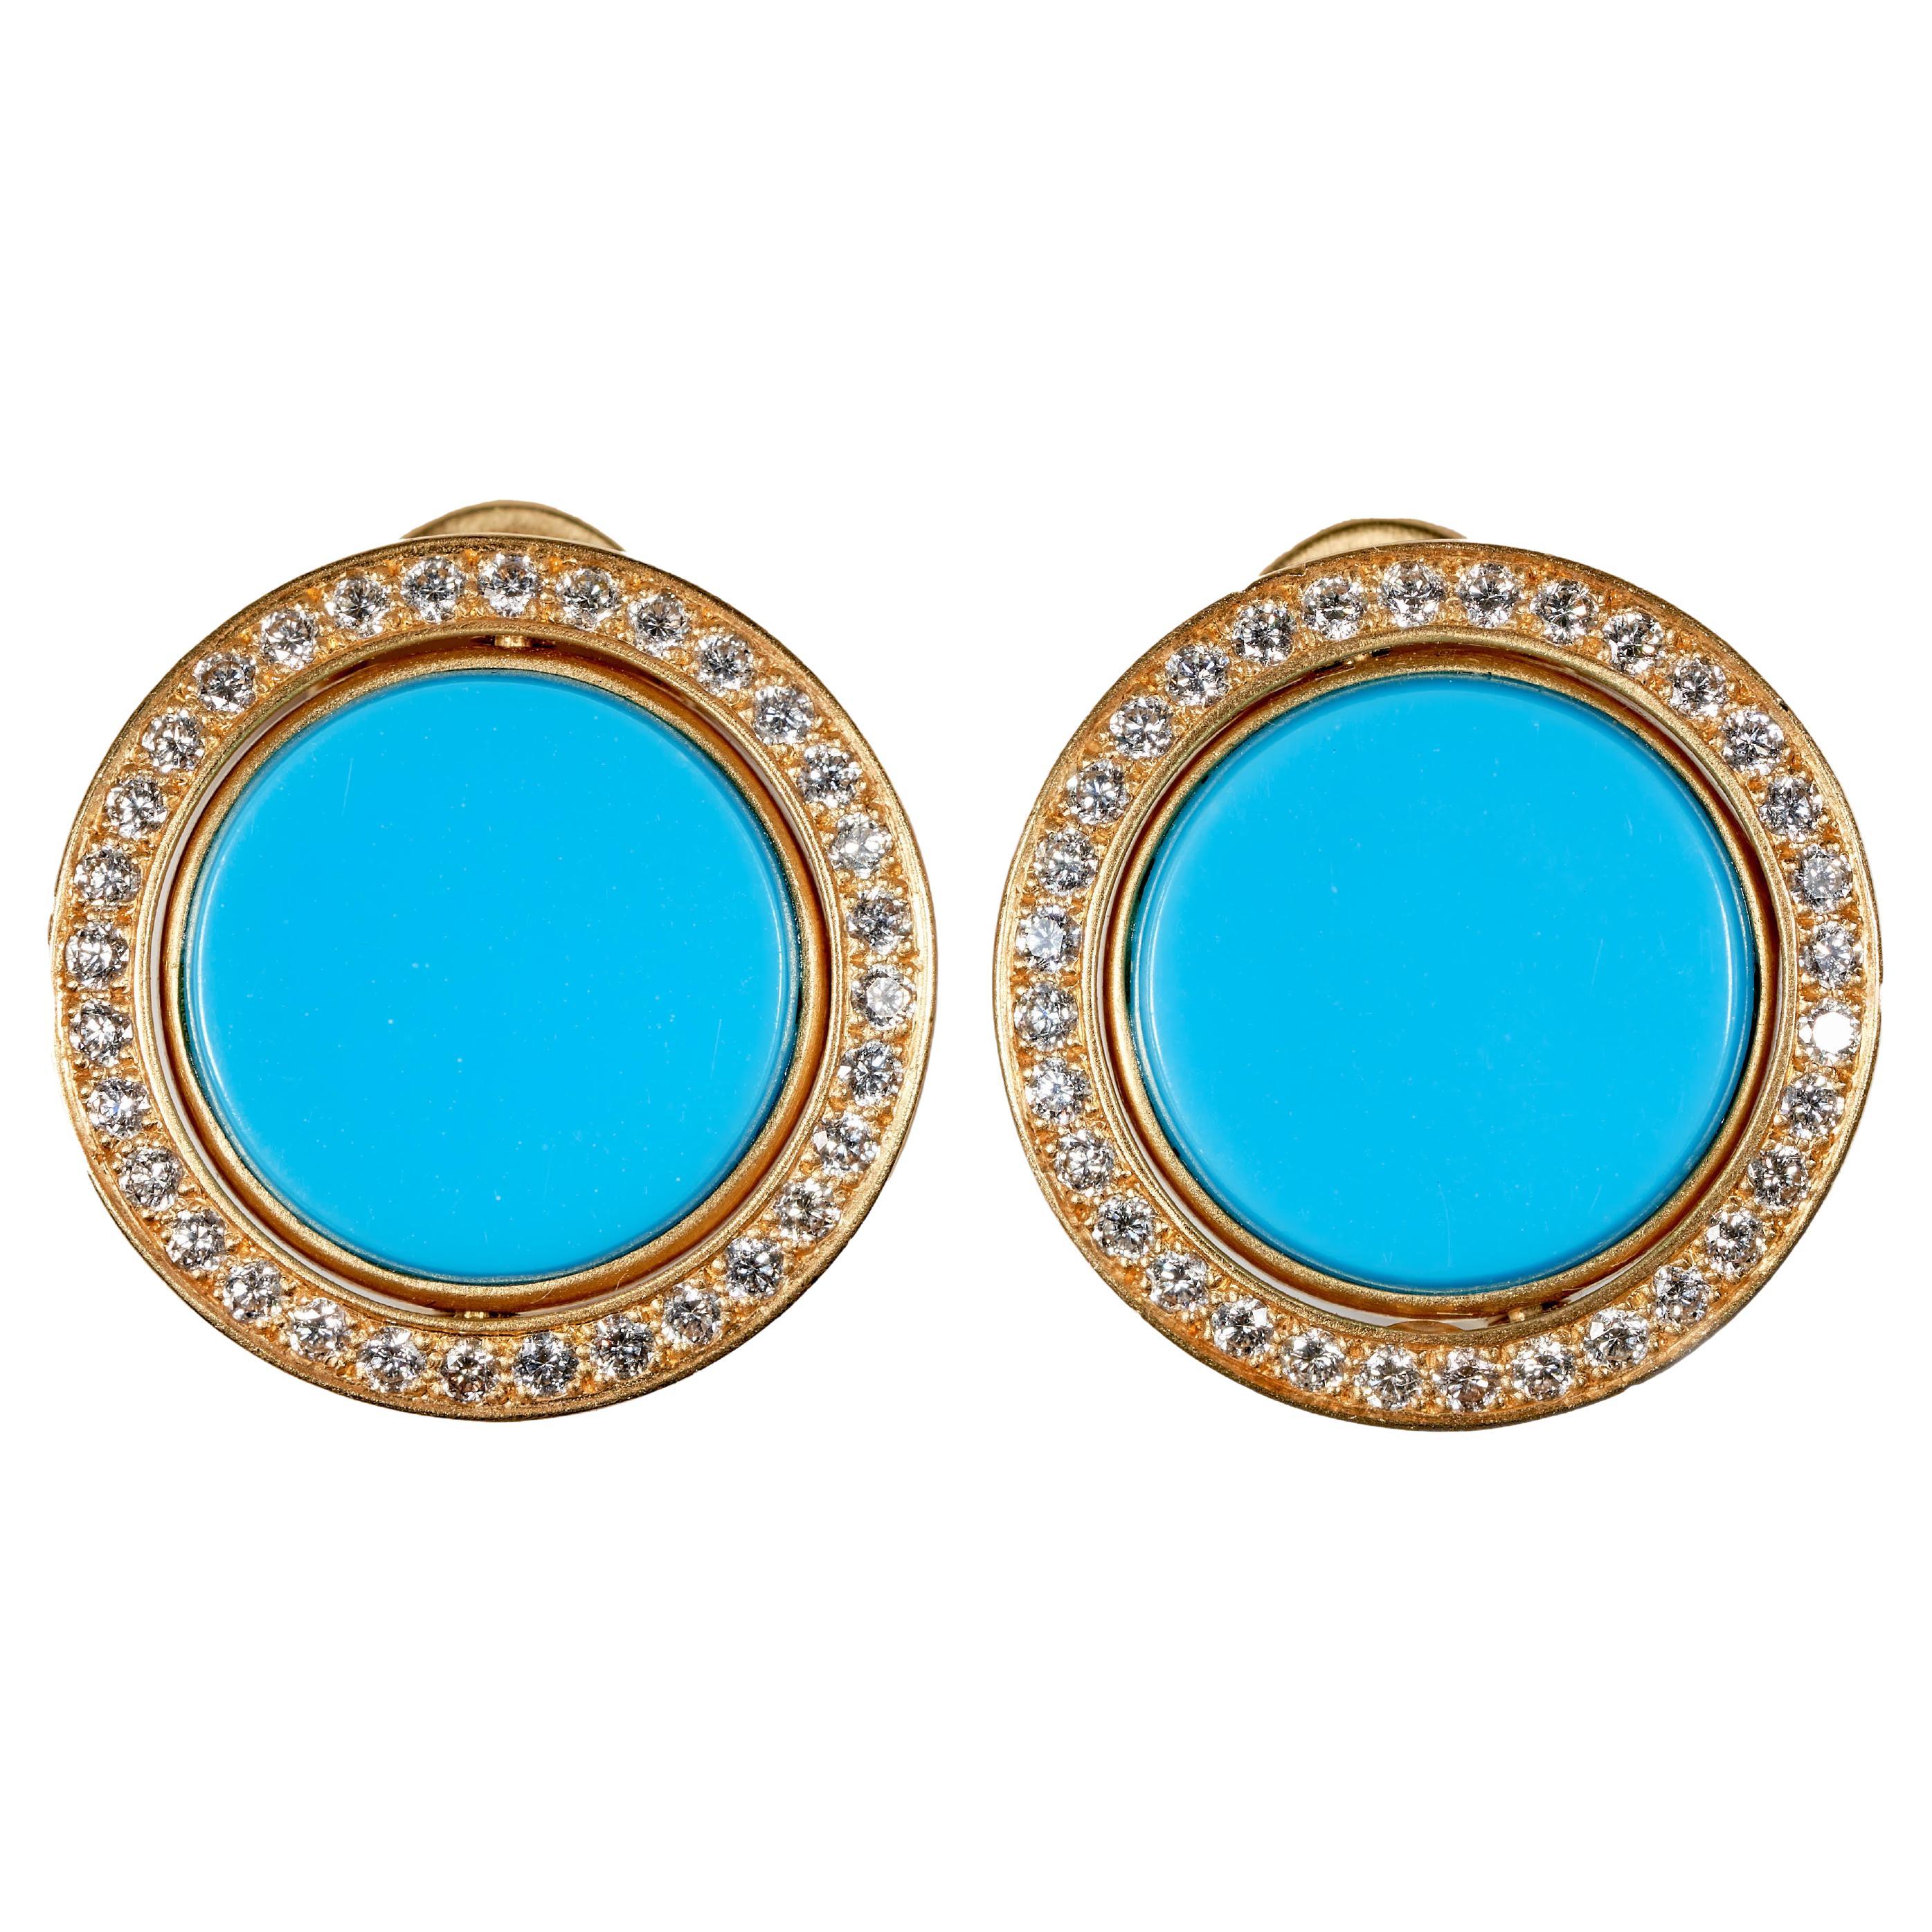 Contemporary Wendy Brandes Turquoise, Carnelian, and Diamond Flip Earrings in 18K Yellow Gold